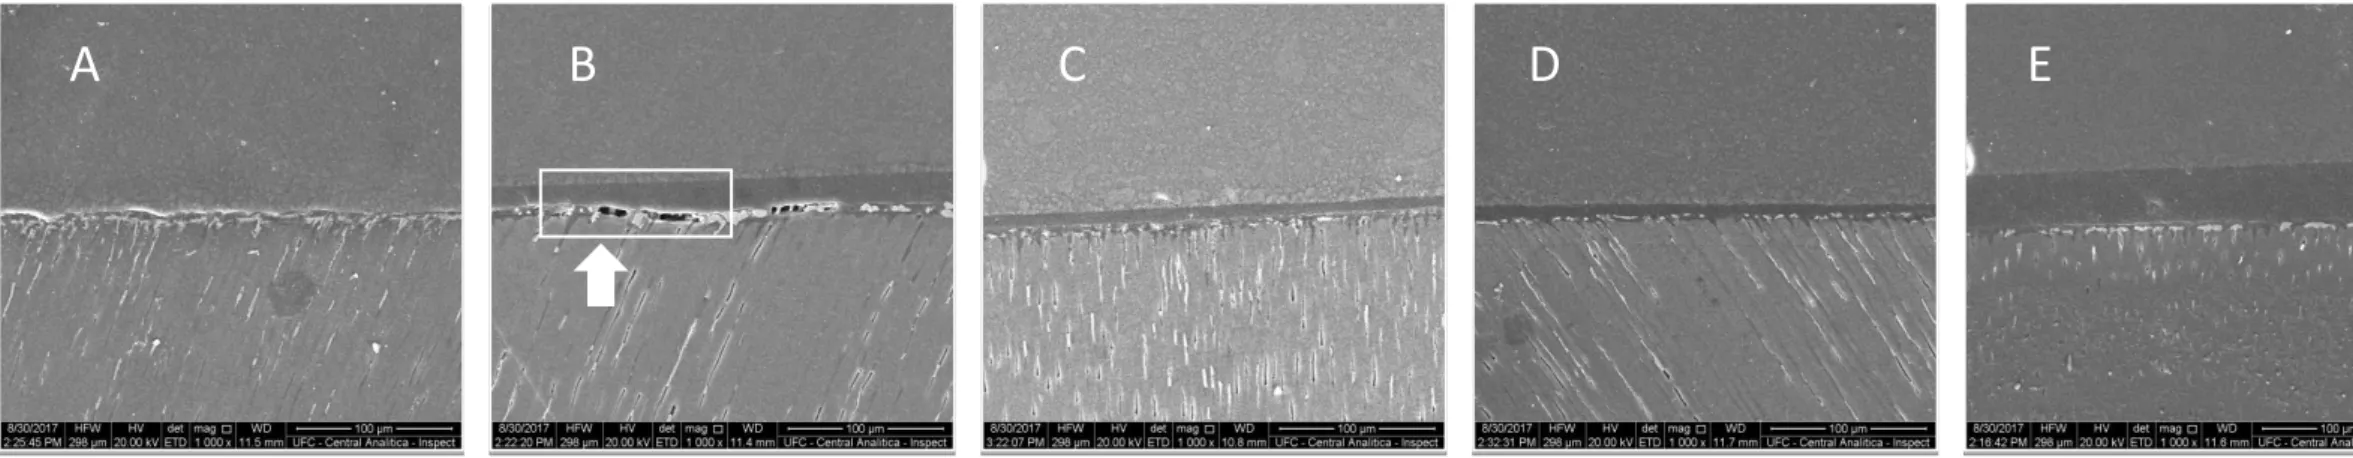 Fig. 3: Evaluation of the dentin / adhesive union interface after the use of dentin pre-treatments (A) WC, (B) AE, (C) EDC+AE, (D) GA+AE and  (E) PAC+AE, with nanoleakage being performed and analyzed by SEM in an increase of 1000X, where a great amount of 